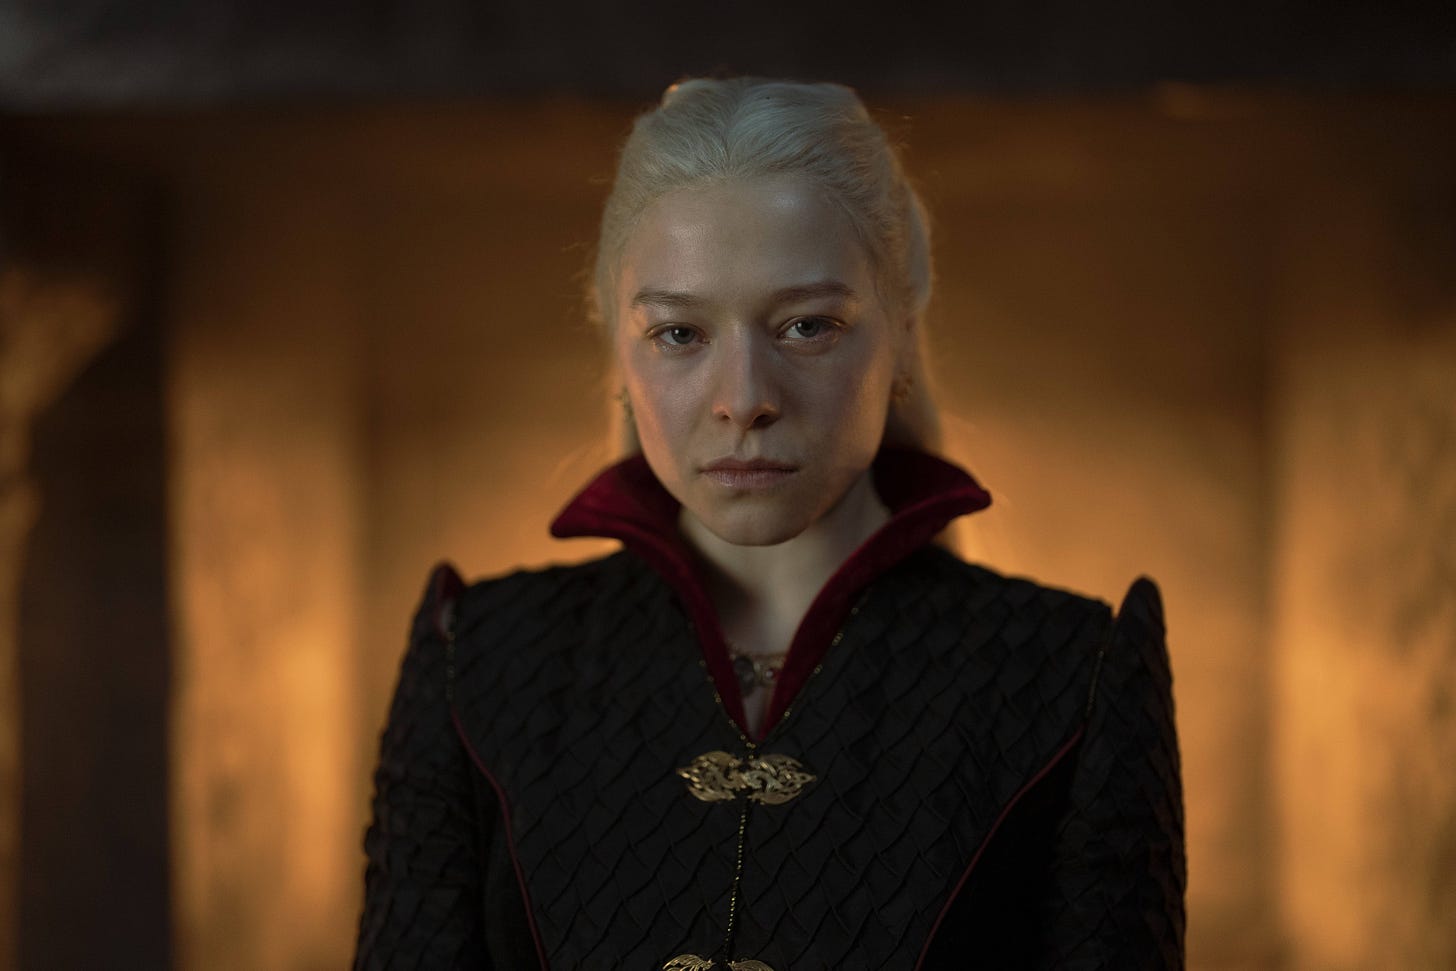 Rhaenyra stares angrily at the camera; war is coming